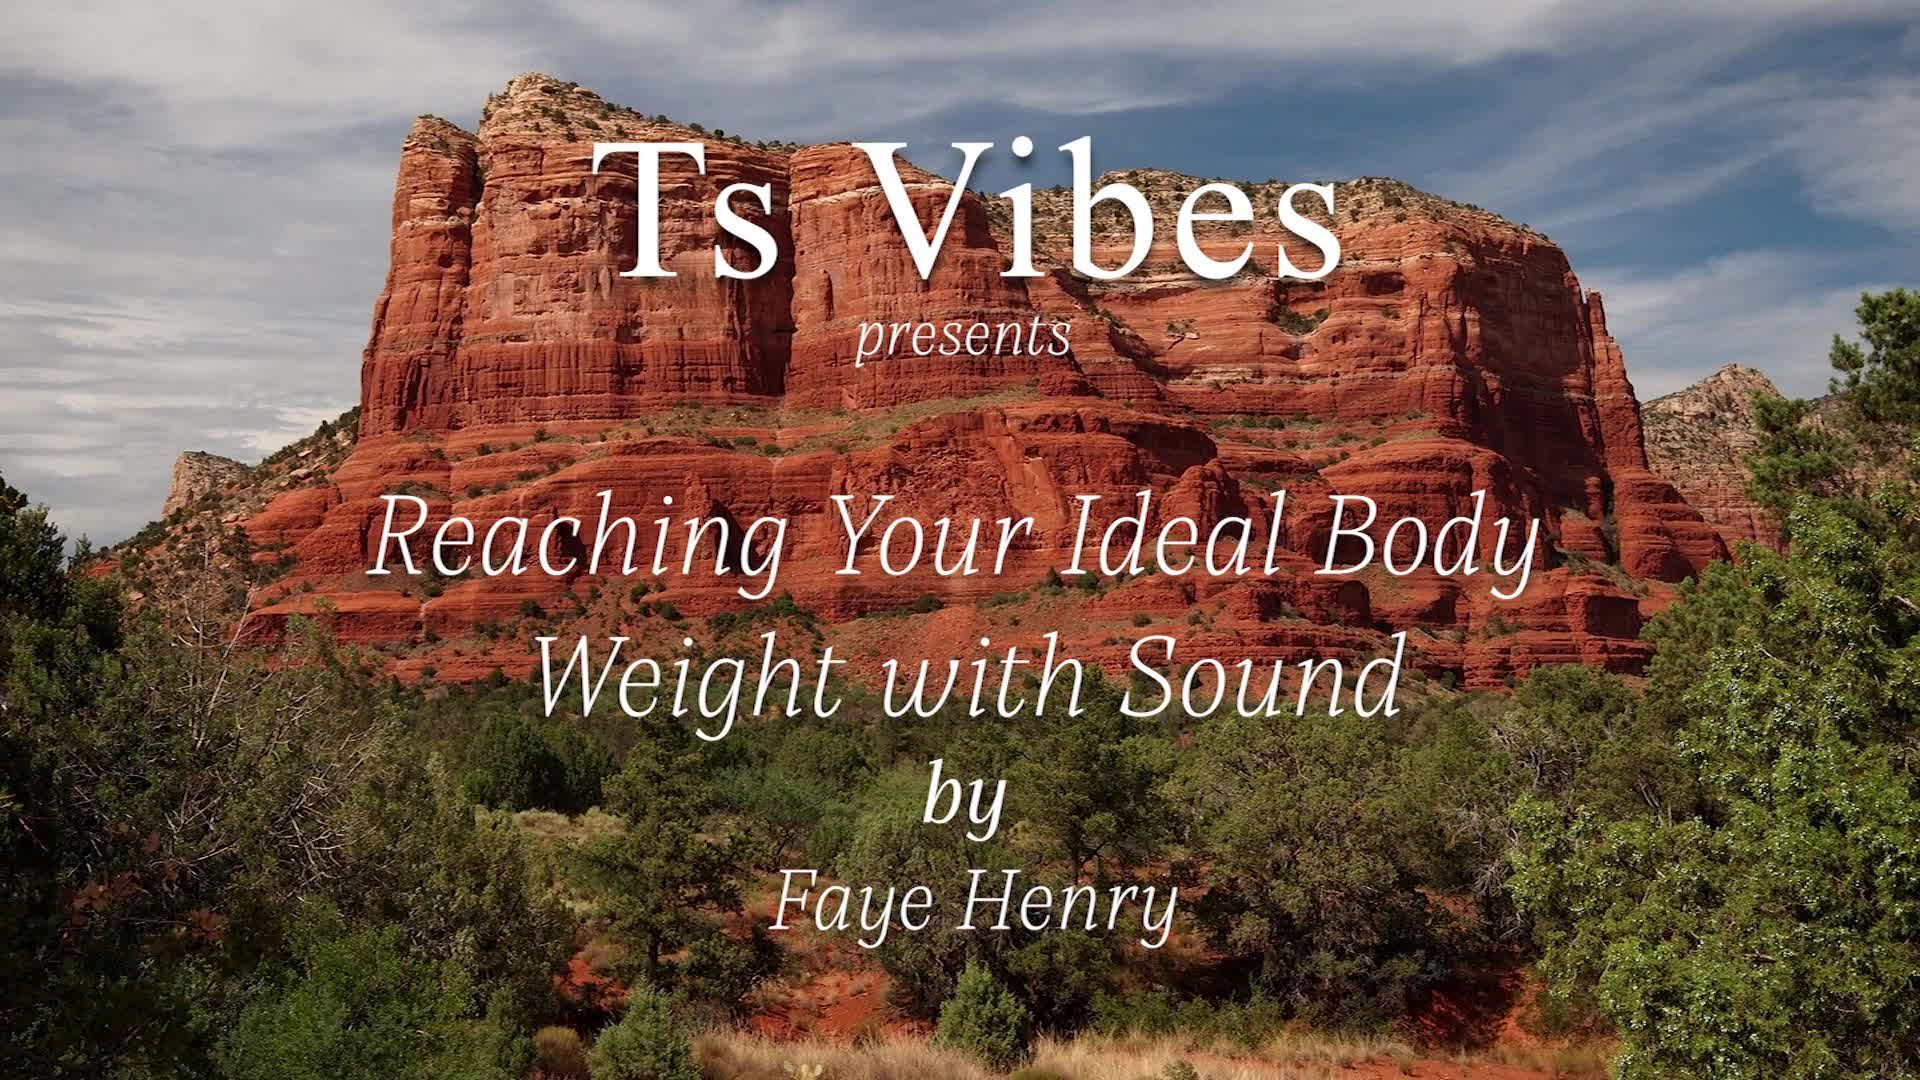 Using Sound to Reach Your Ideal Body Weight